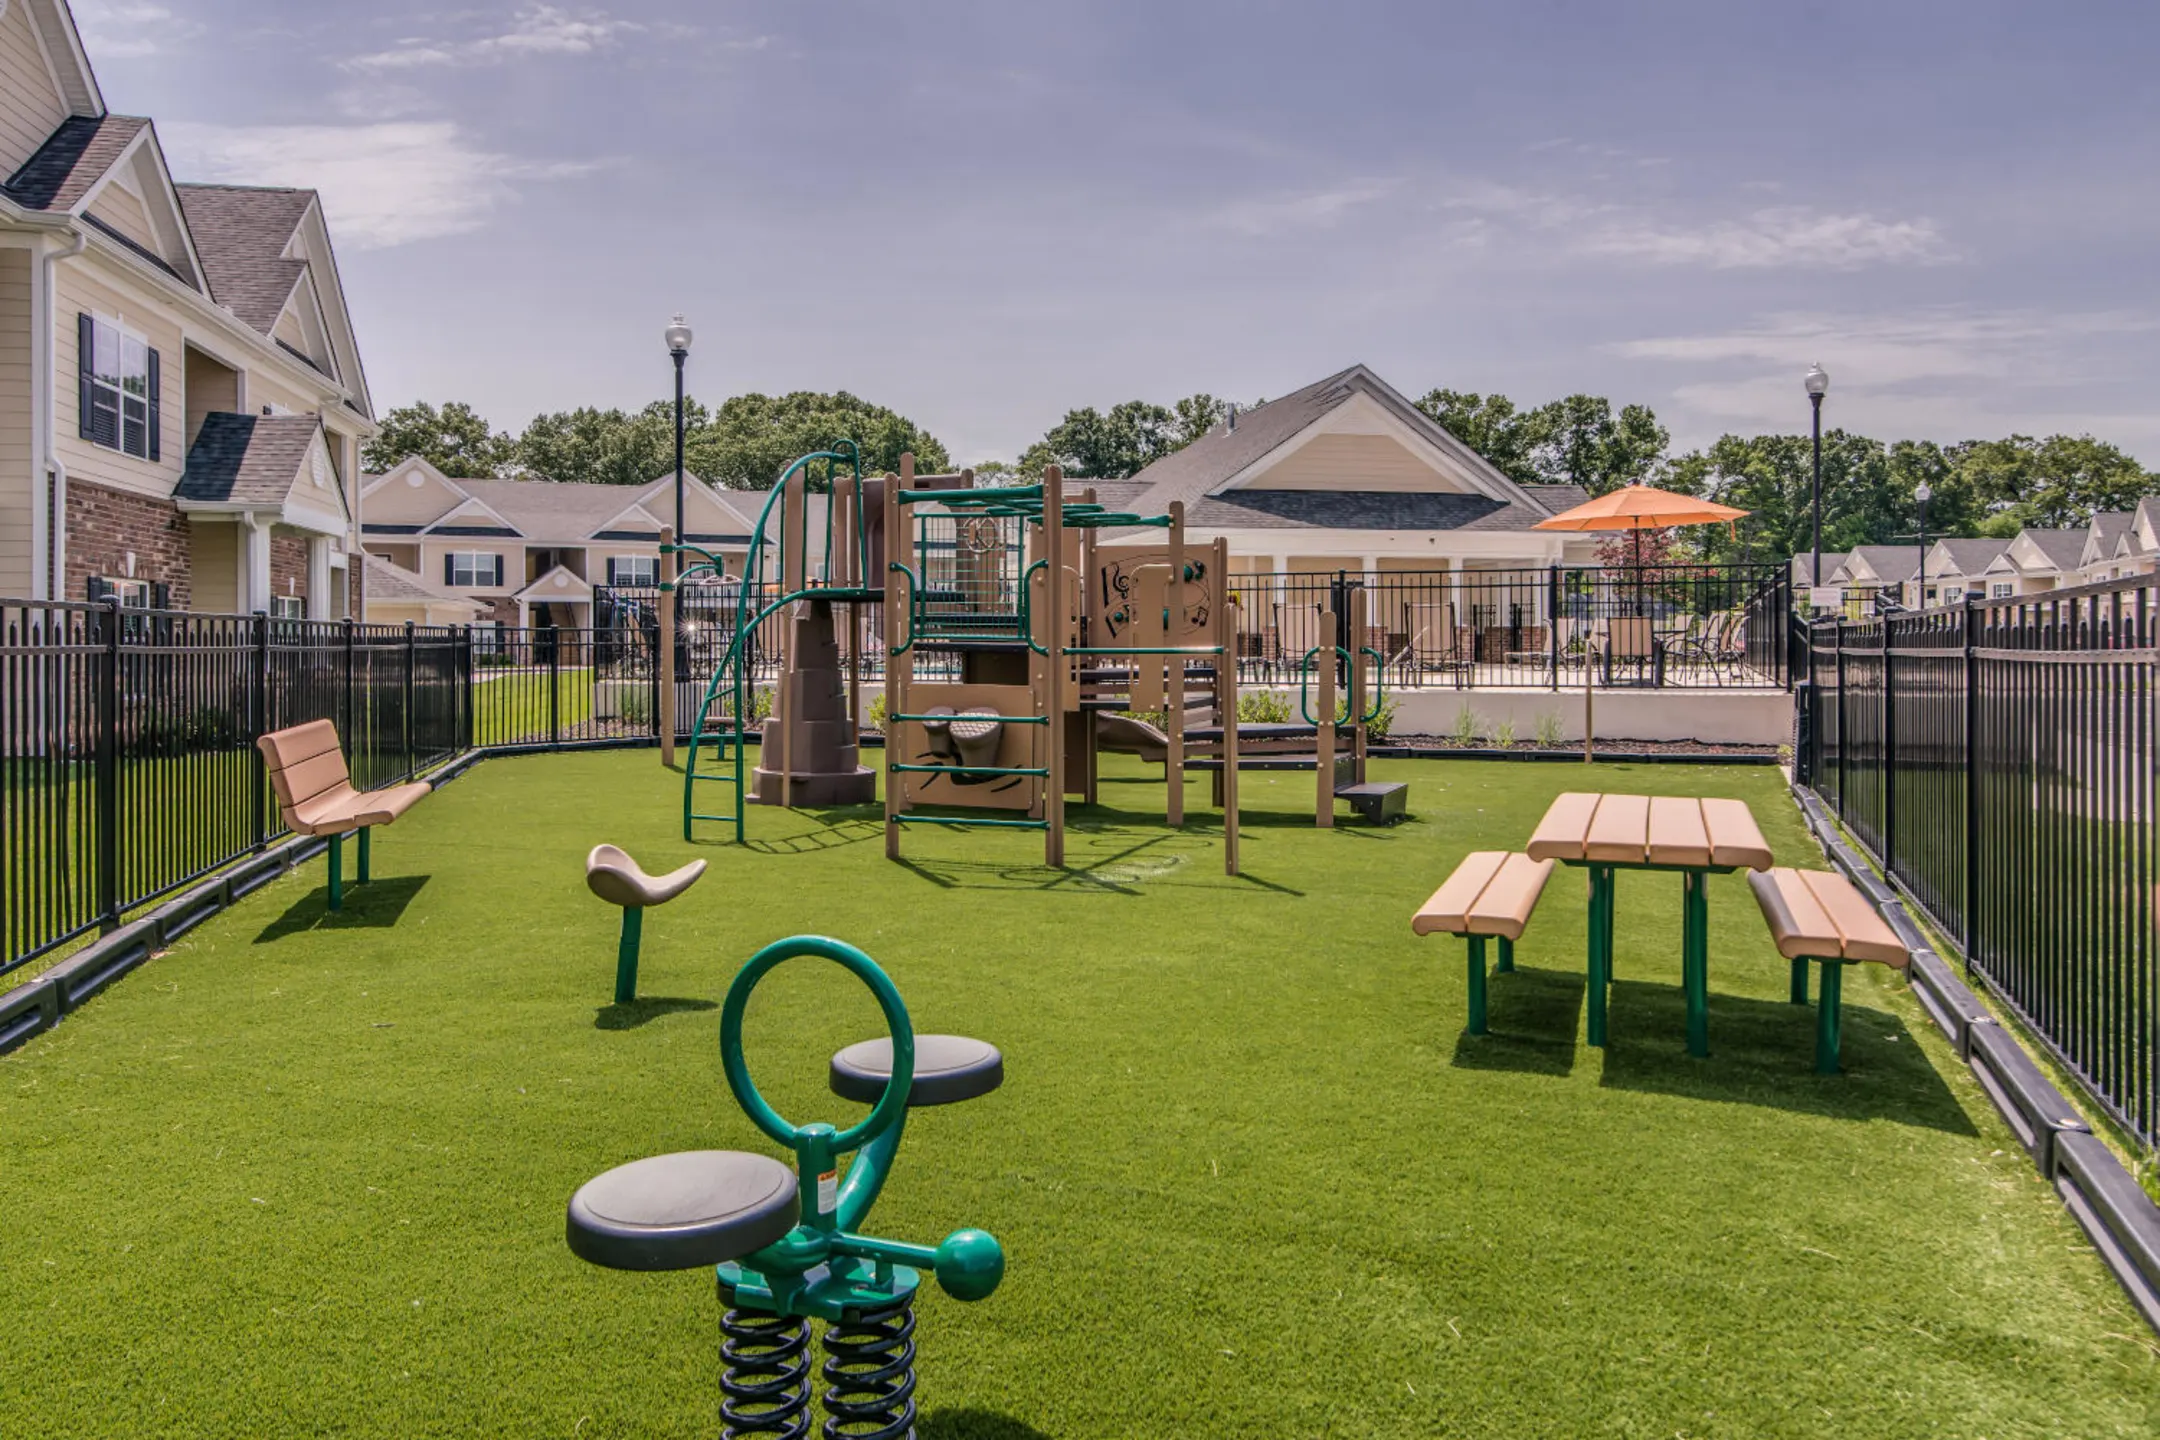 Playground - Cumberland Trace Village Apartments - Bowling Green, KY